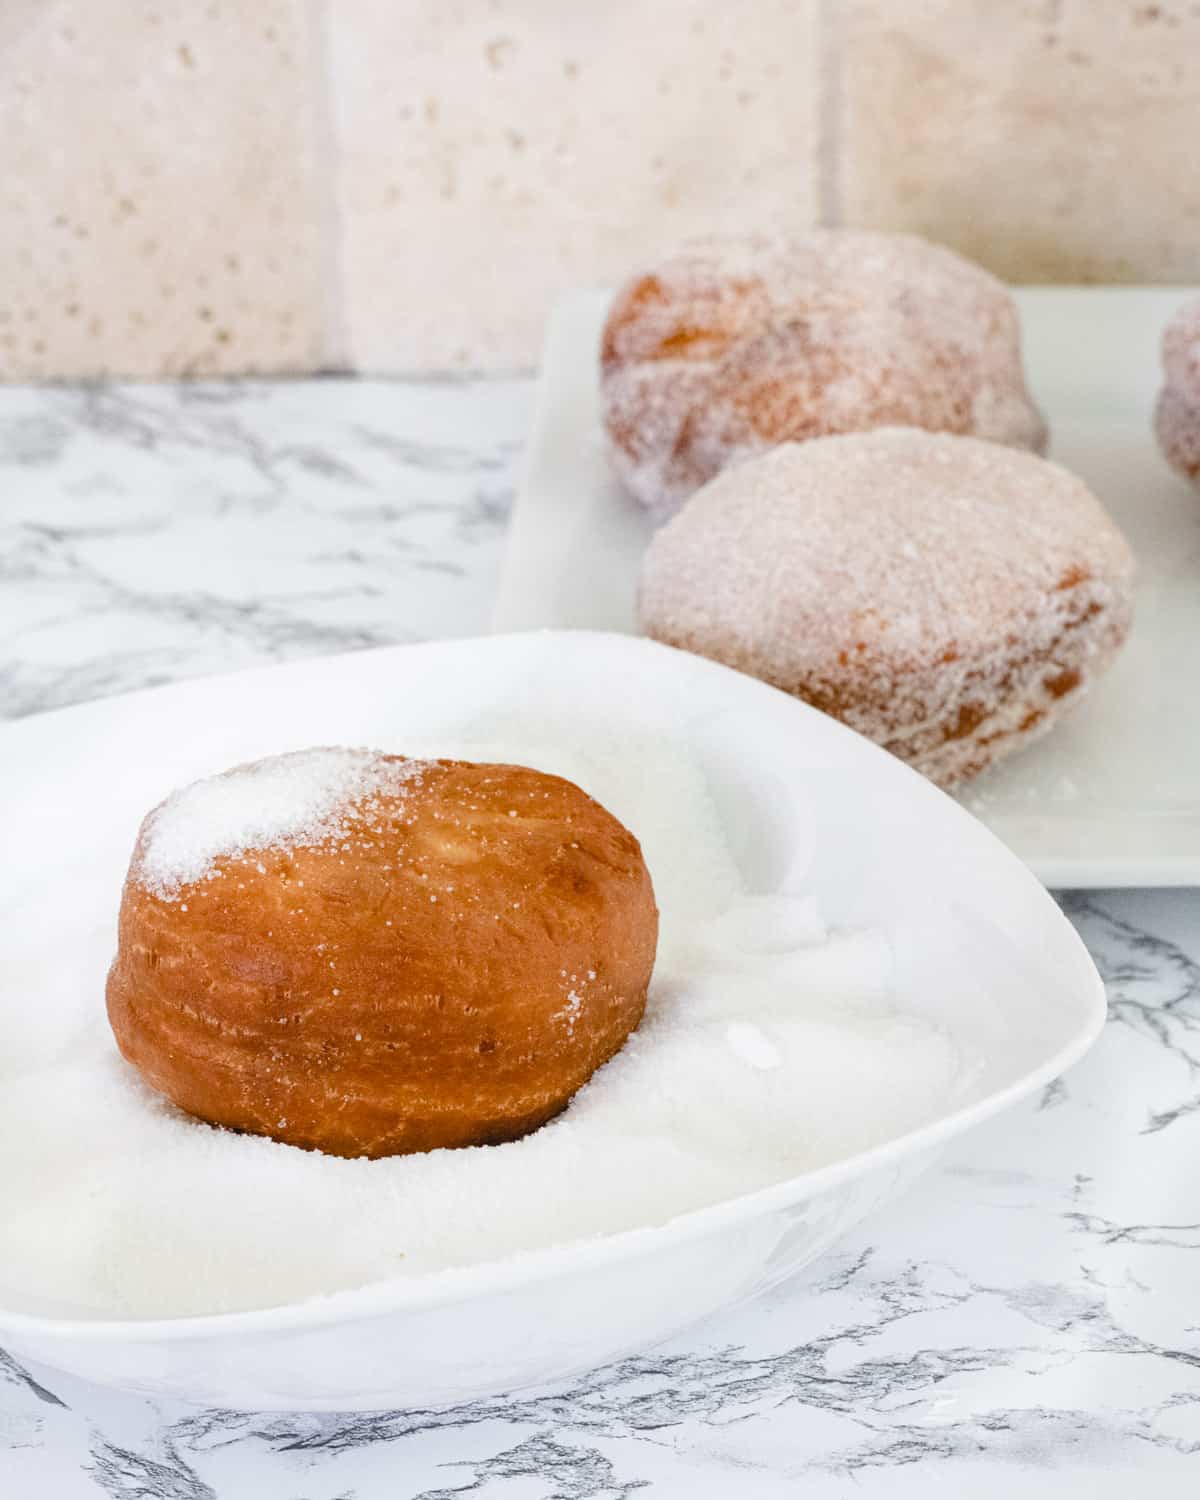 A paczki in a bowl of sugar. Paczki already covered with sugar are on a plate in the background.